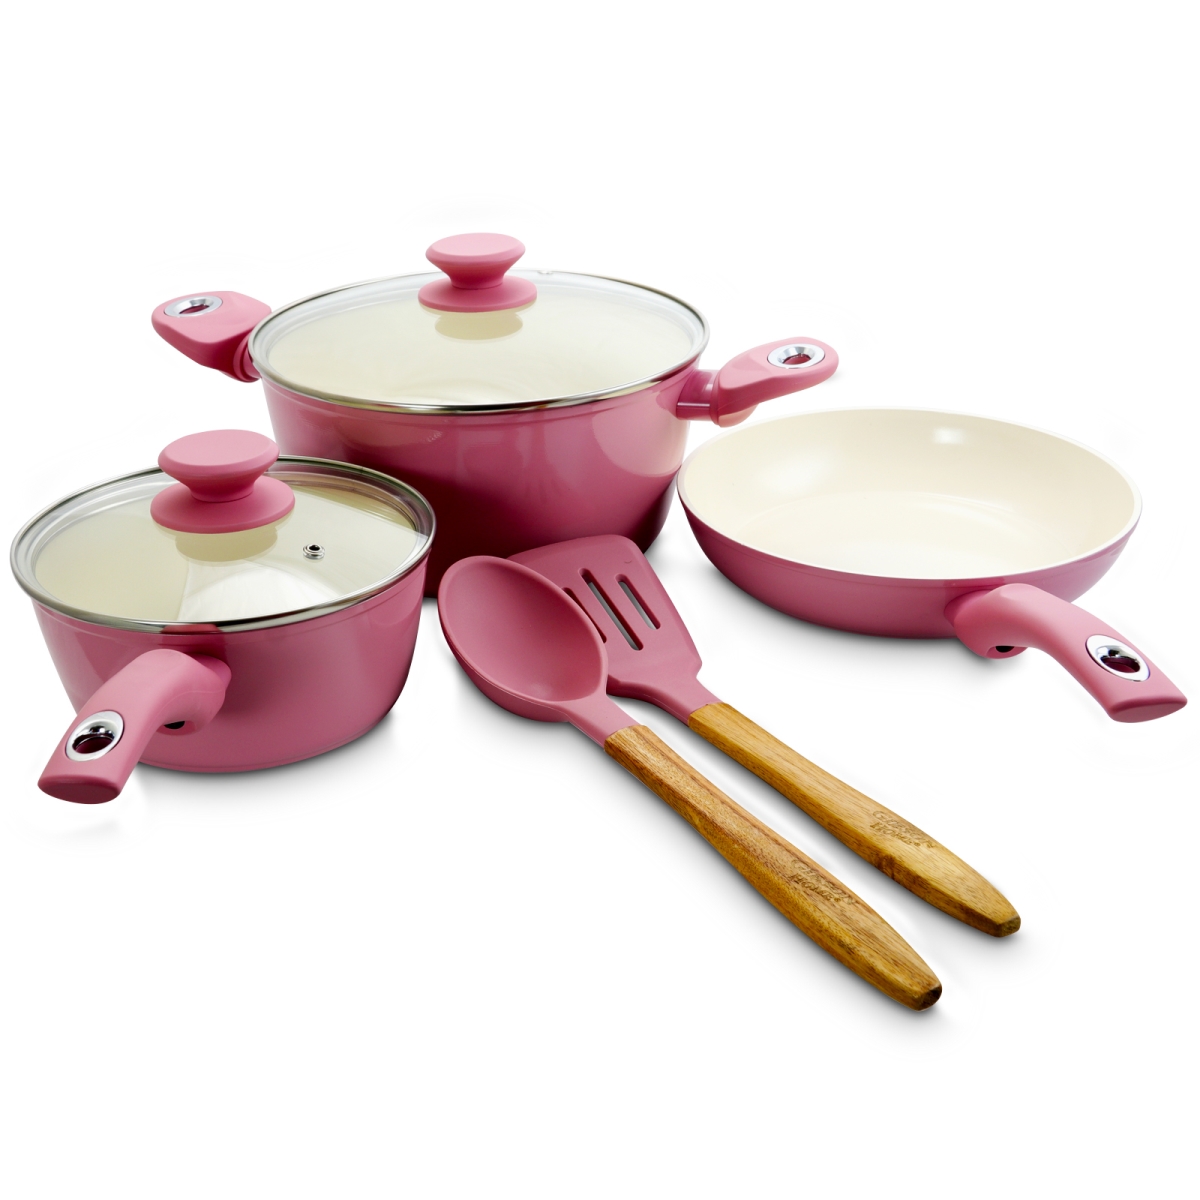 Picture of Gibson Home 123878.07 7 Piece Plaza Cafe Aluminum Nonstick Cookware Set, Lavender